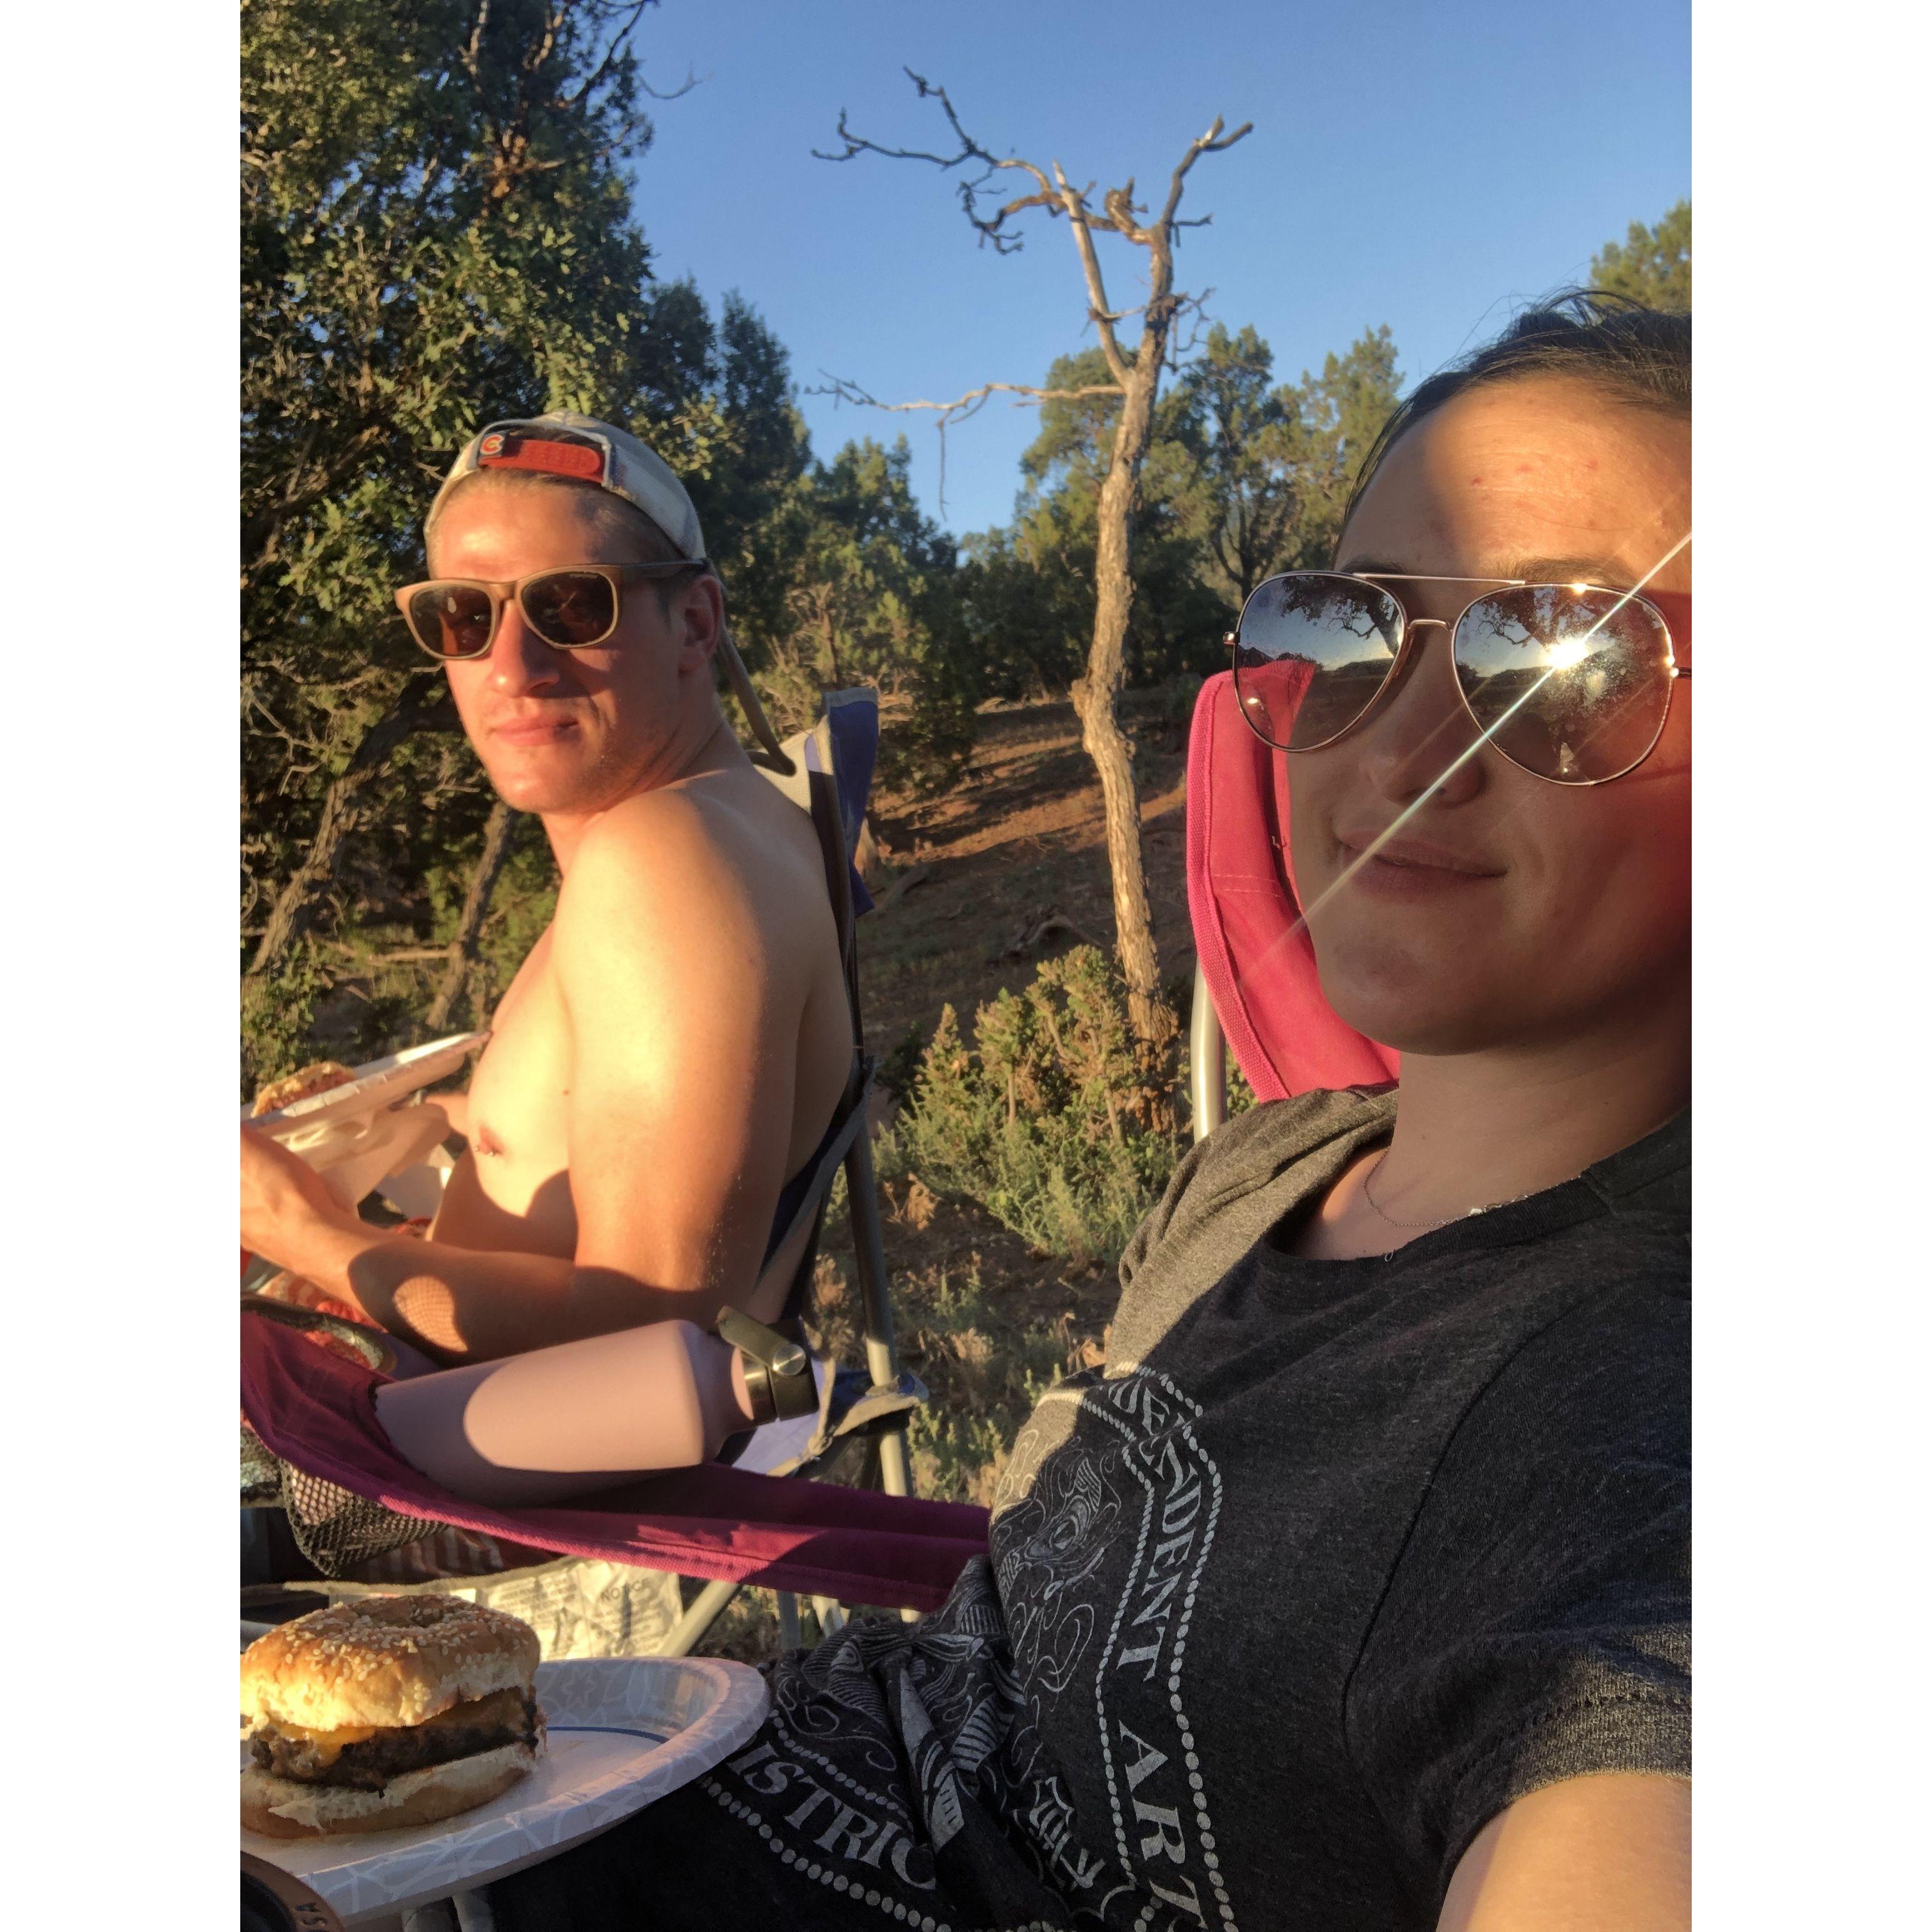 The camping trip where we said "I Love You" for the first time